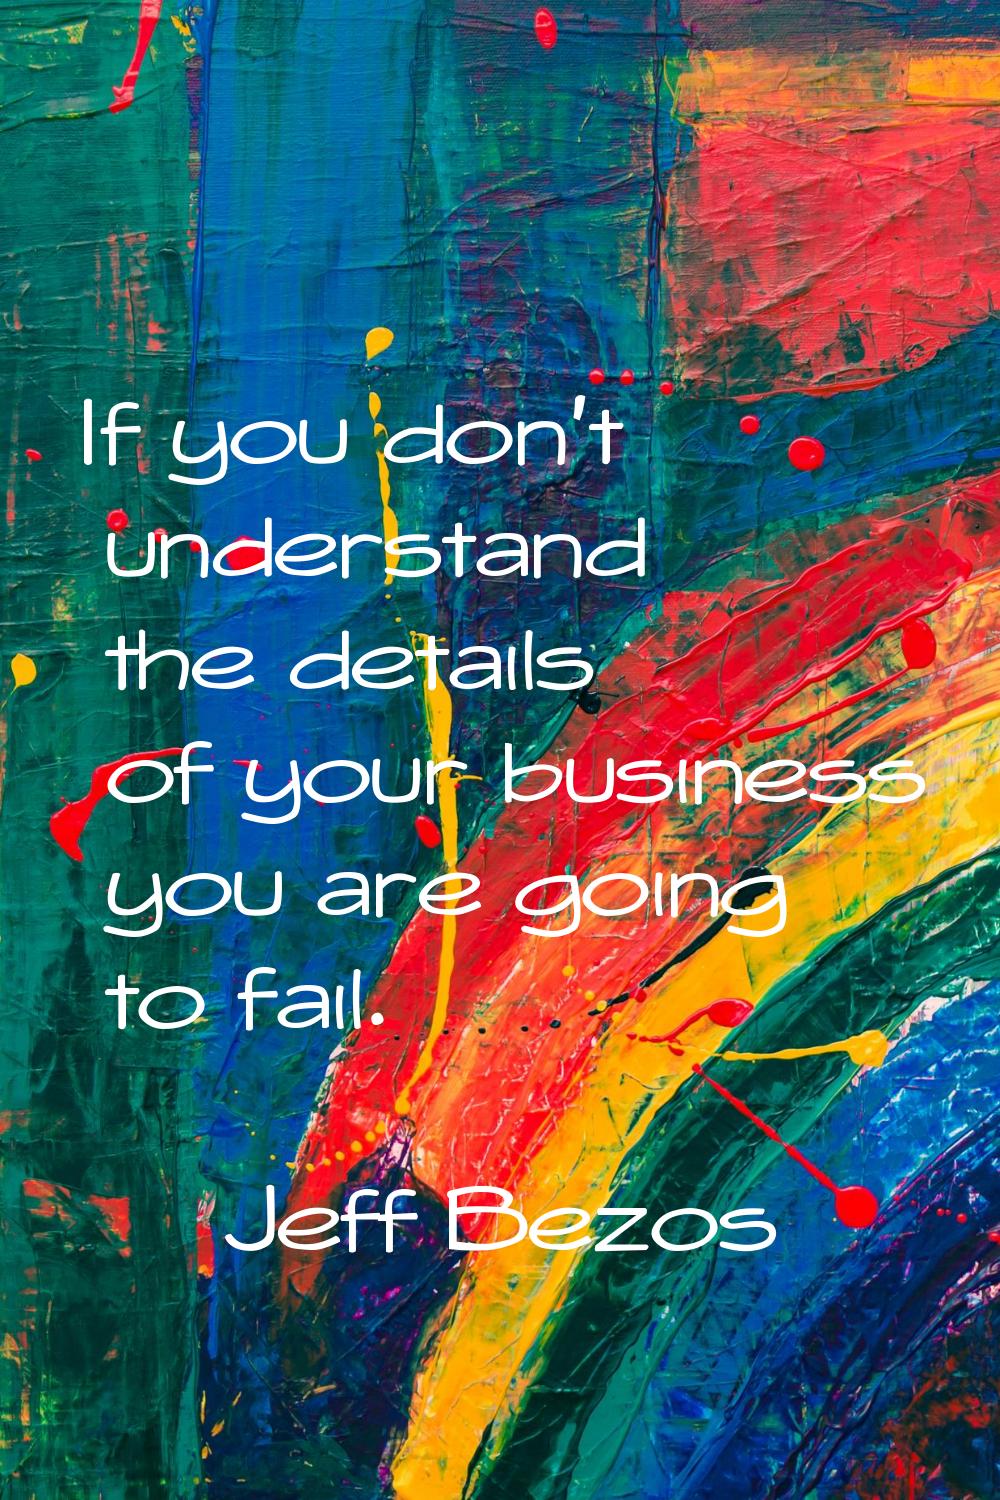 If you don't understand the details of your business you are going to fail.